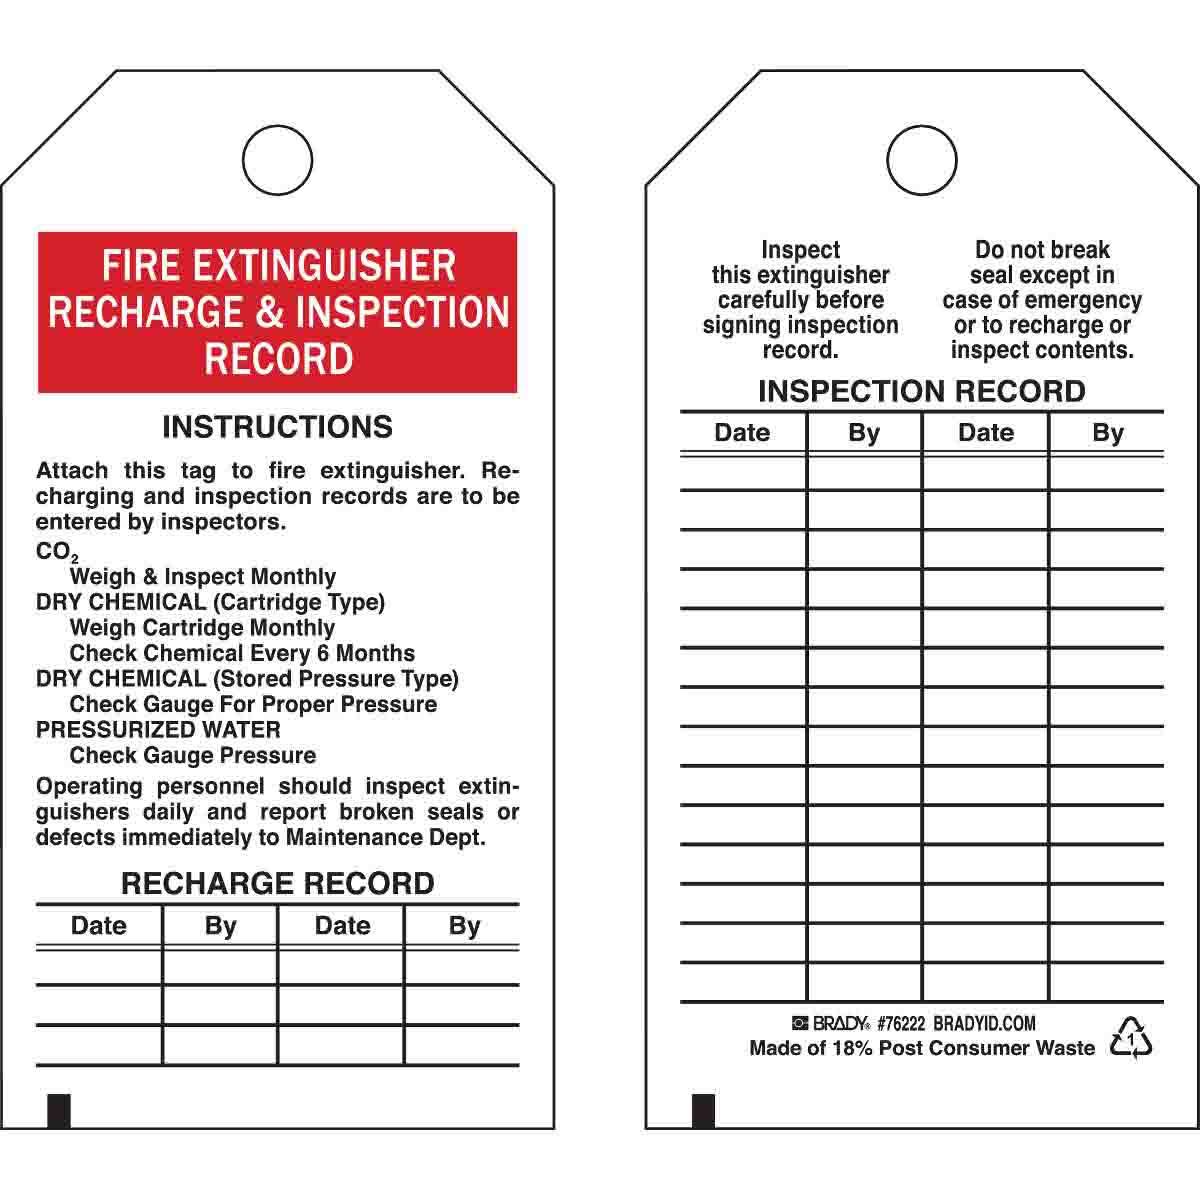 Brady Part: 76222 | Fire Extinguisher Recharge and Inspection Record Tags | BradyID.com